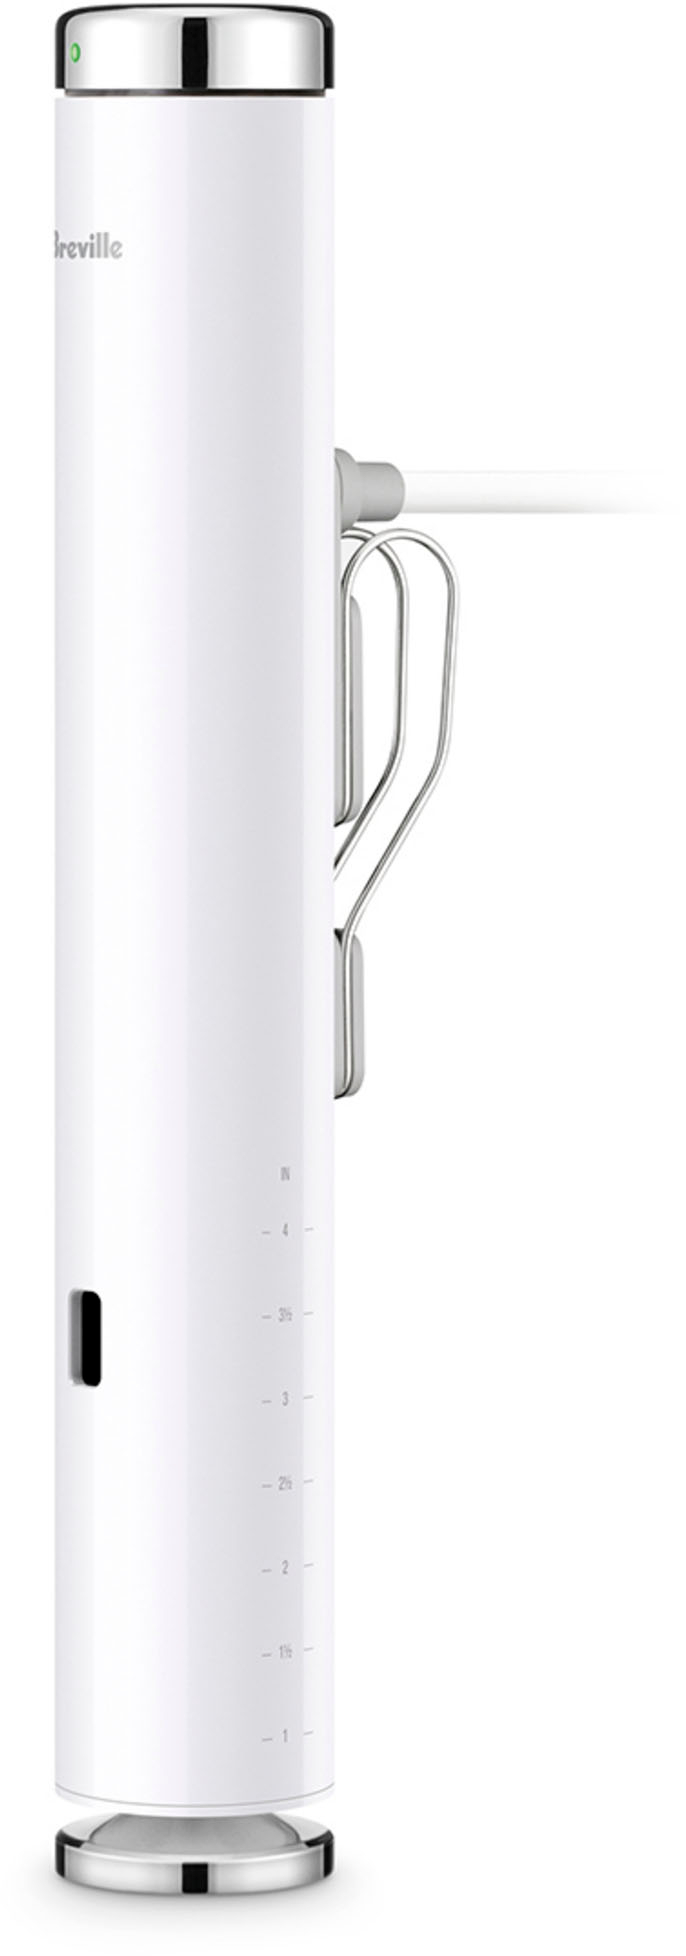 Breville® Introduces the Joule™ Turbo Sous Vide, the First Model